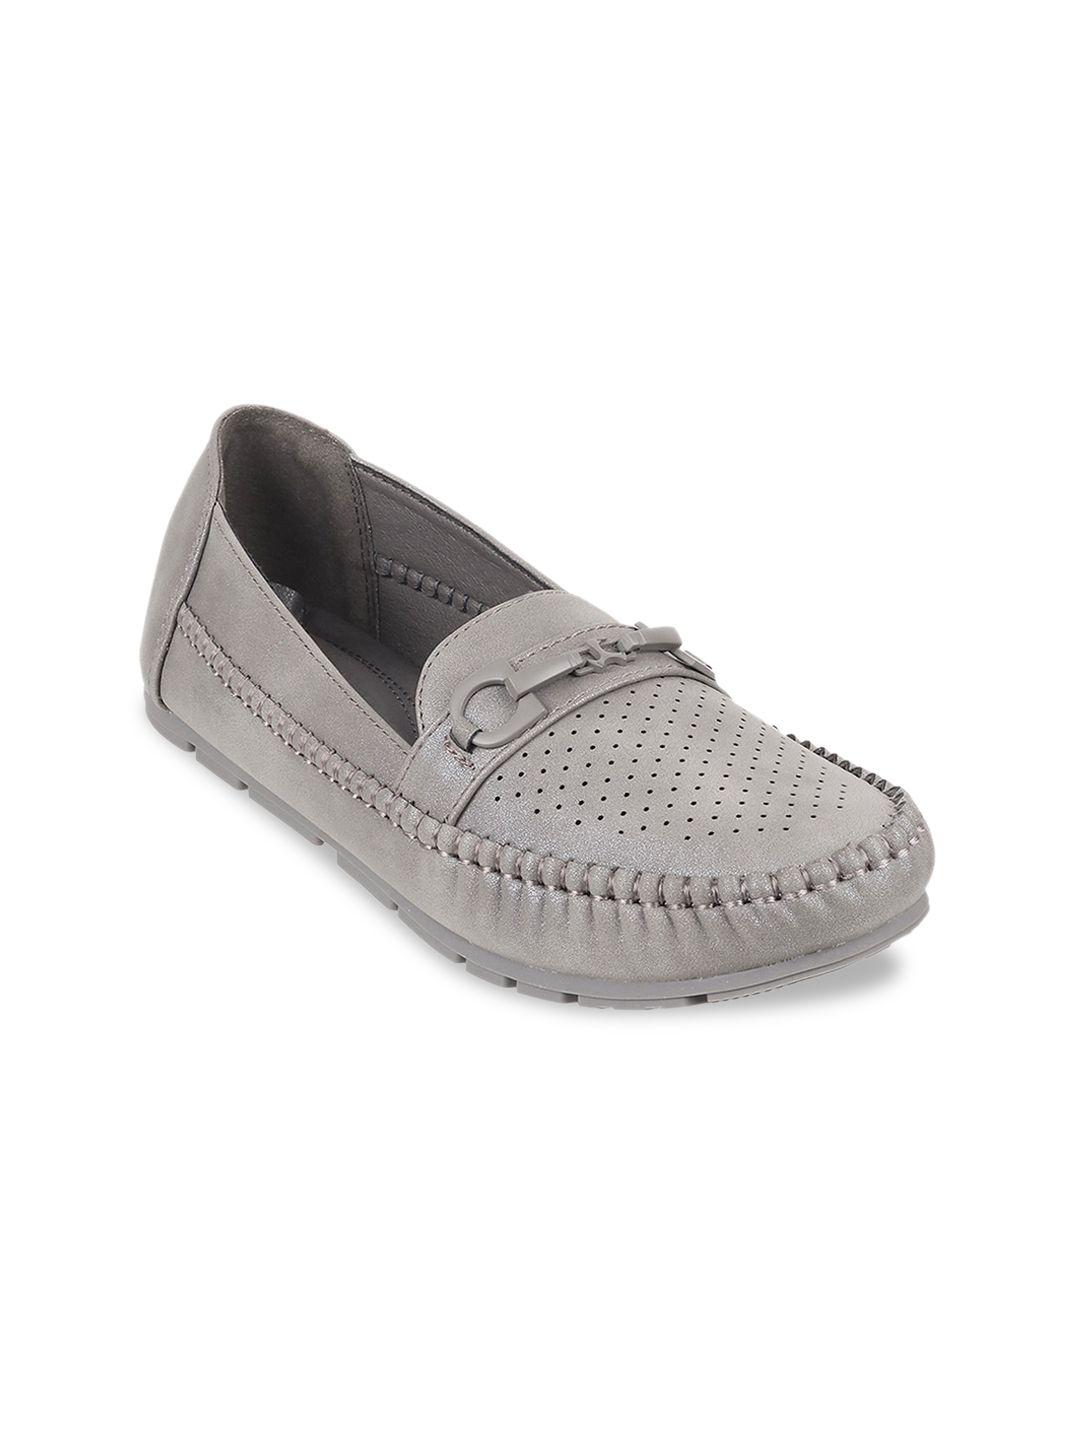 mochi women perforationed loafers